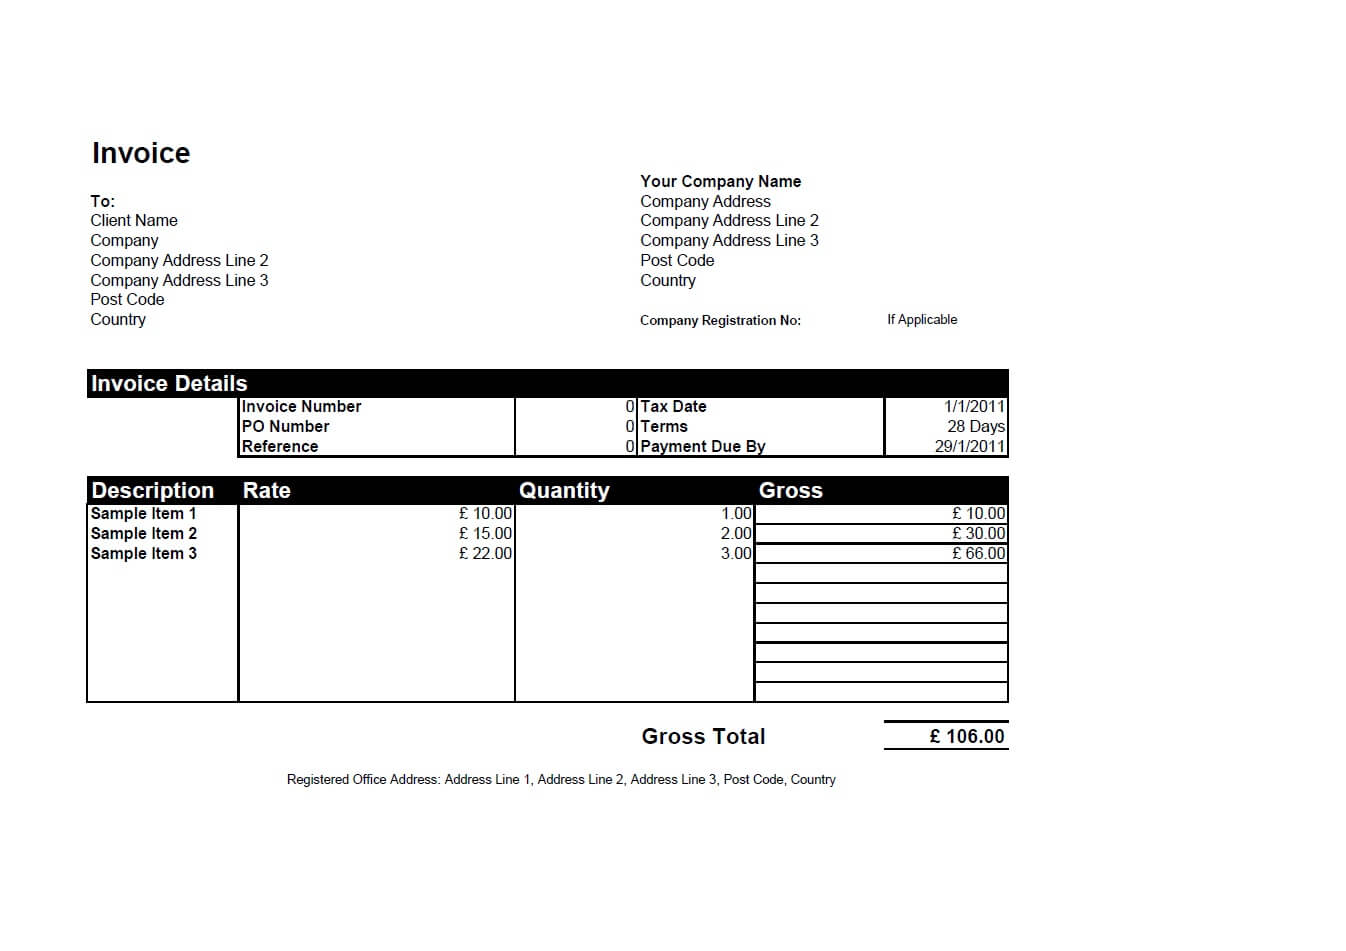 Letters Of Templates For Invoices Free Excel Within Templates For Invoices Free Excel Form